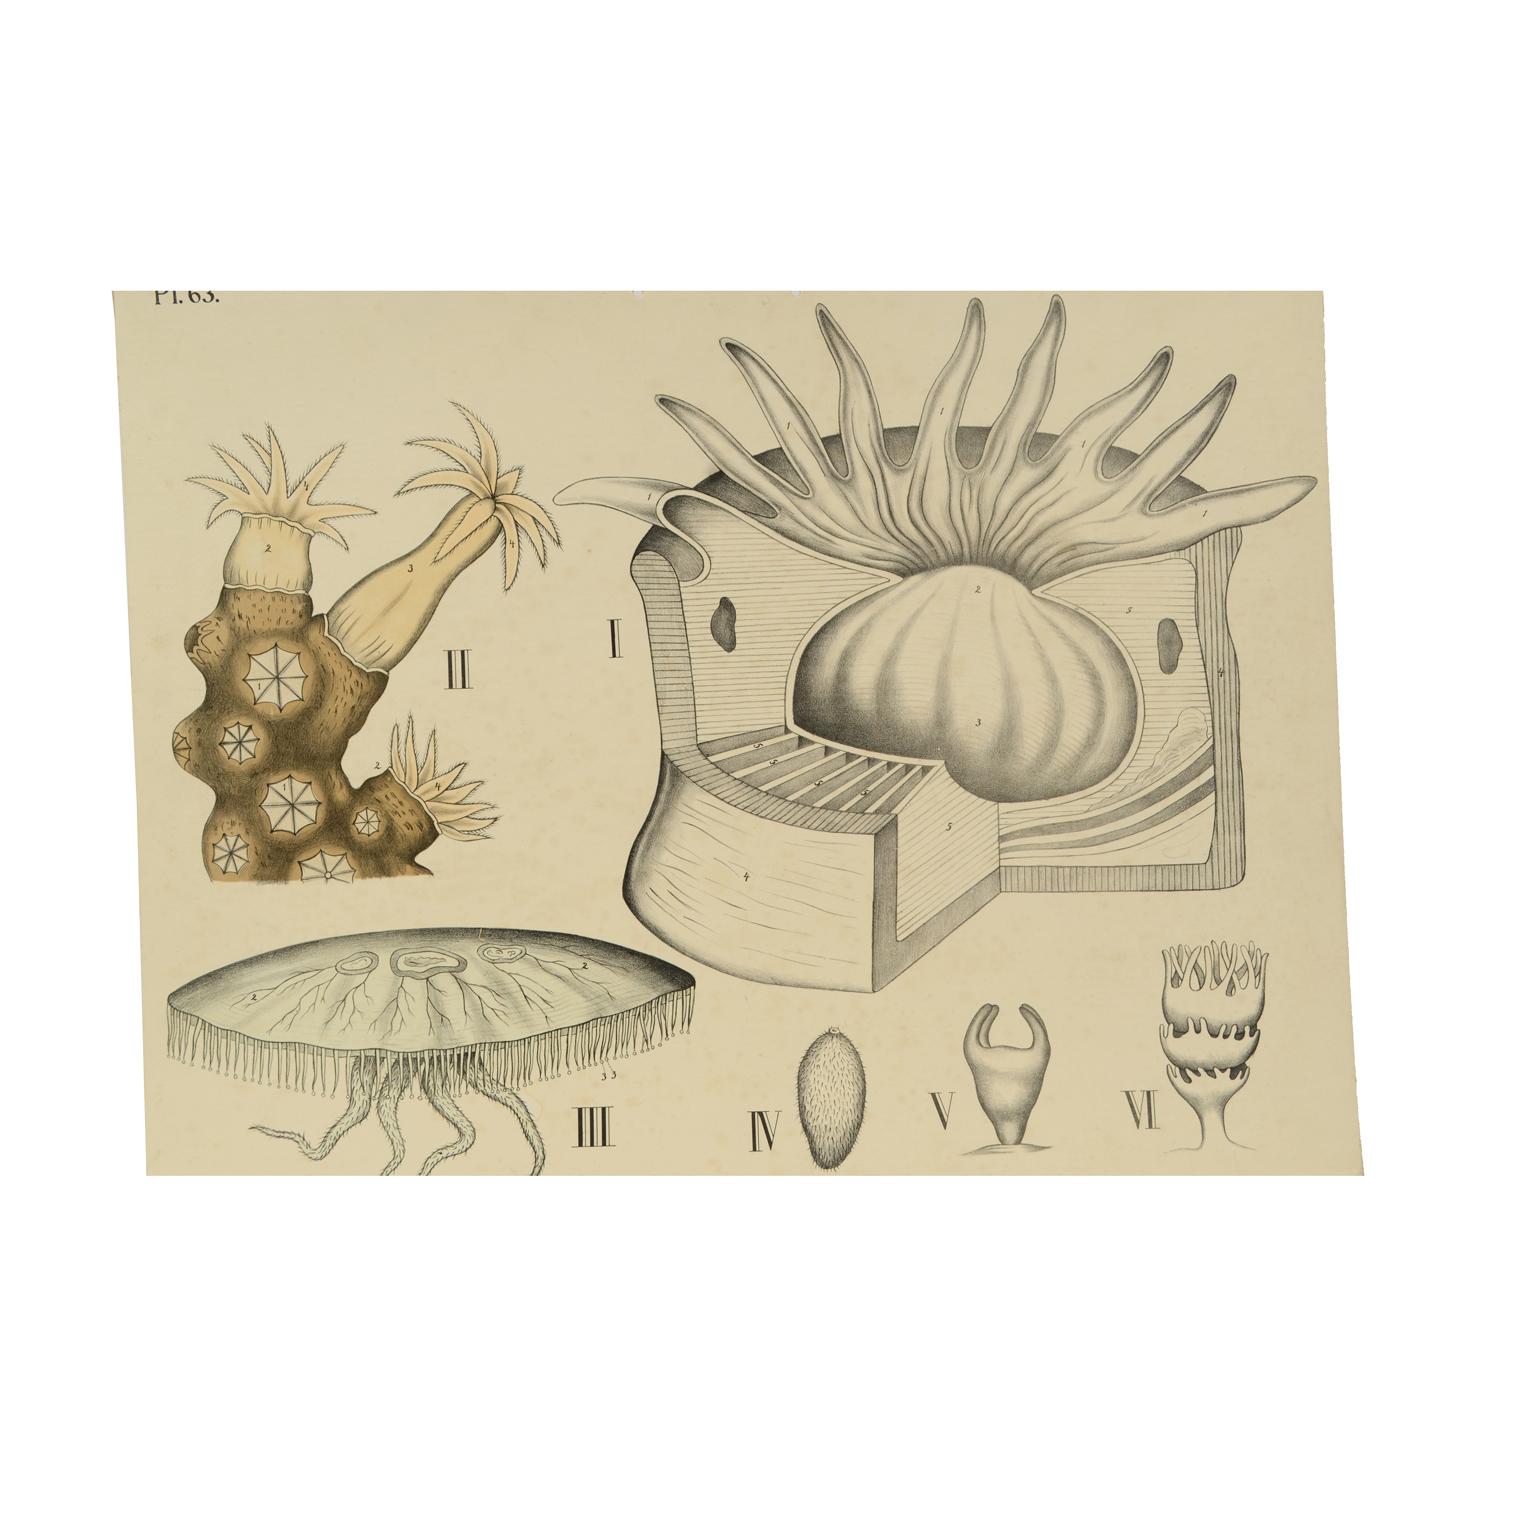 Zoological didactic plate n. 63 lithograph on cardboard made in 1912 depicting the family of coelenterates with jellyfish, coral and sea anemone. Dybdhals Zoologiske Plancher P.M.Bye & Co Oslo. Made by H Aschehoug & Co. Good condition. Measures: